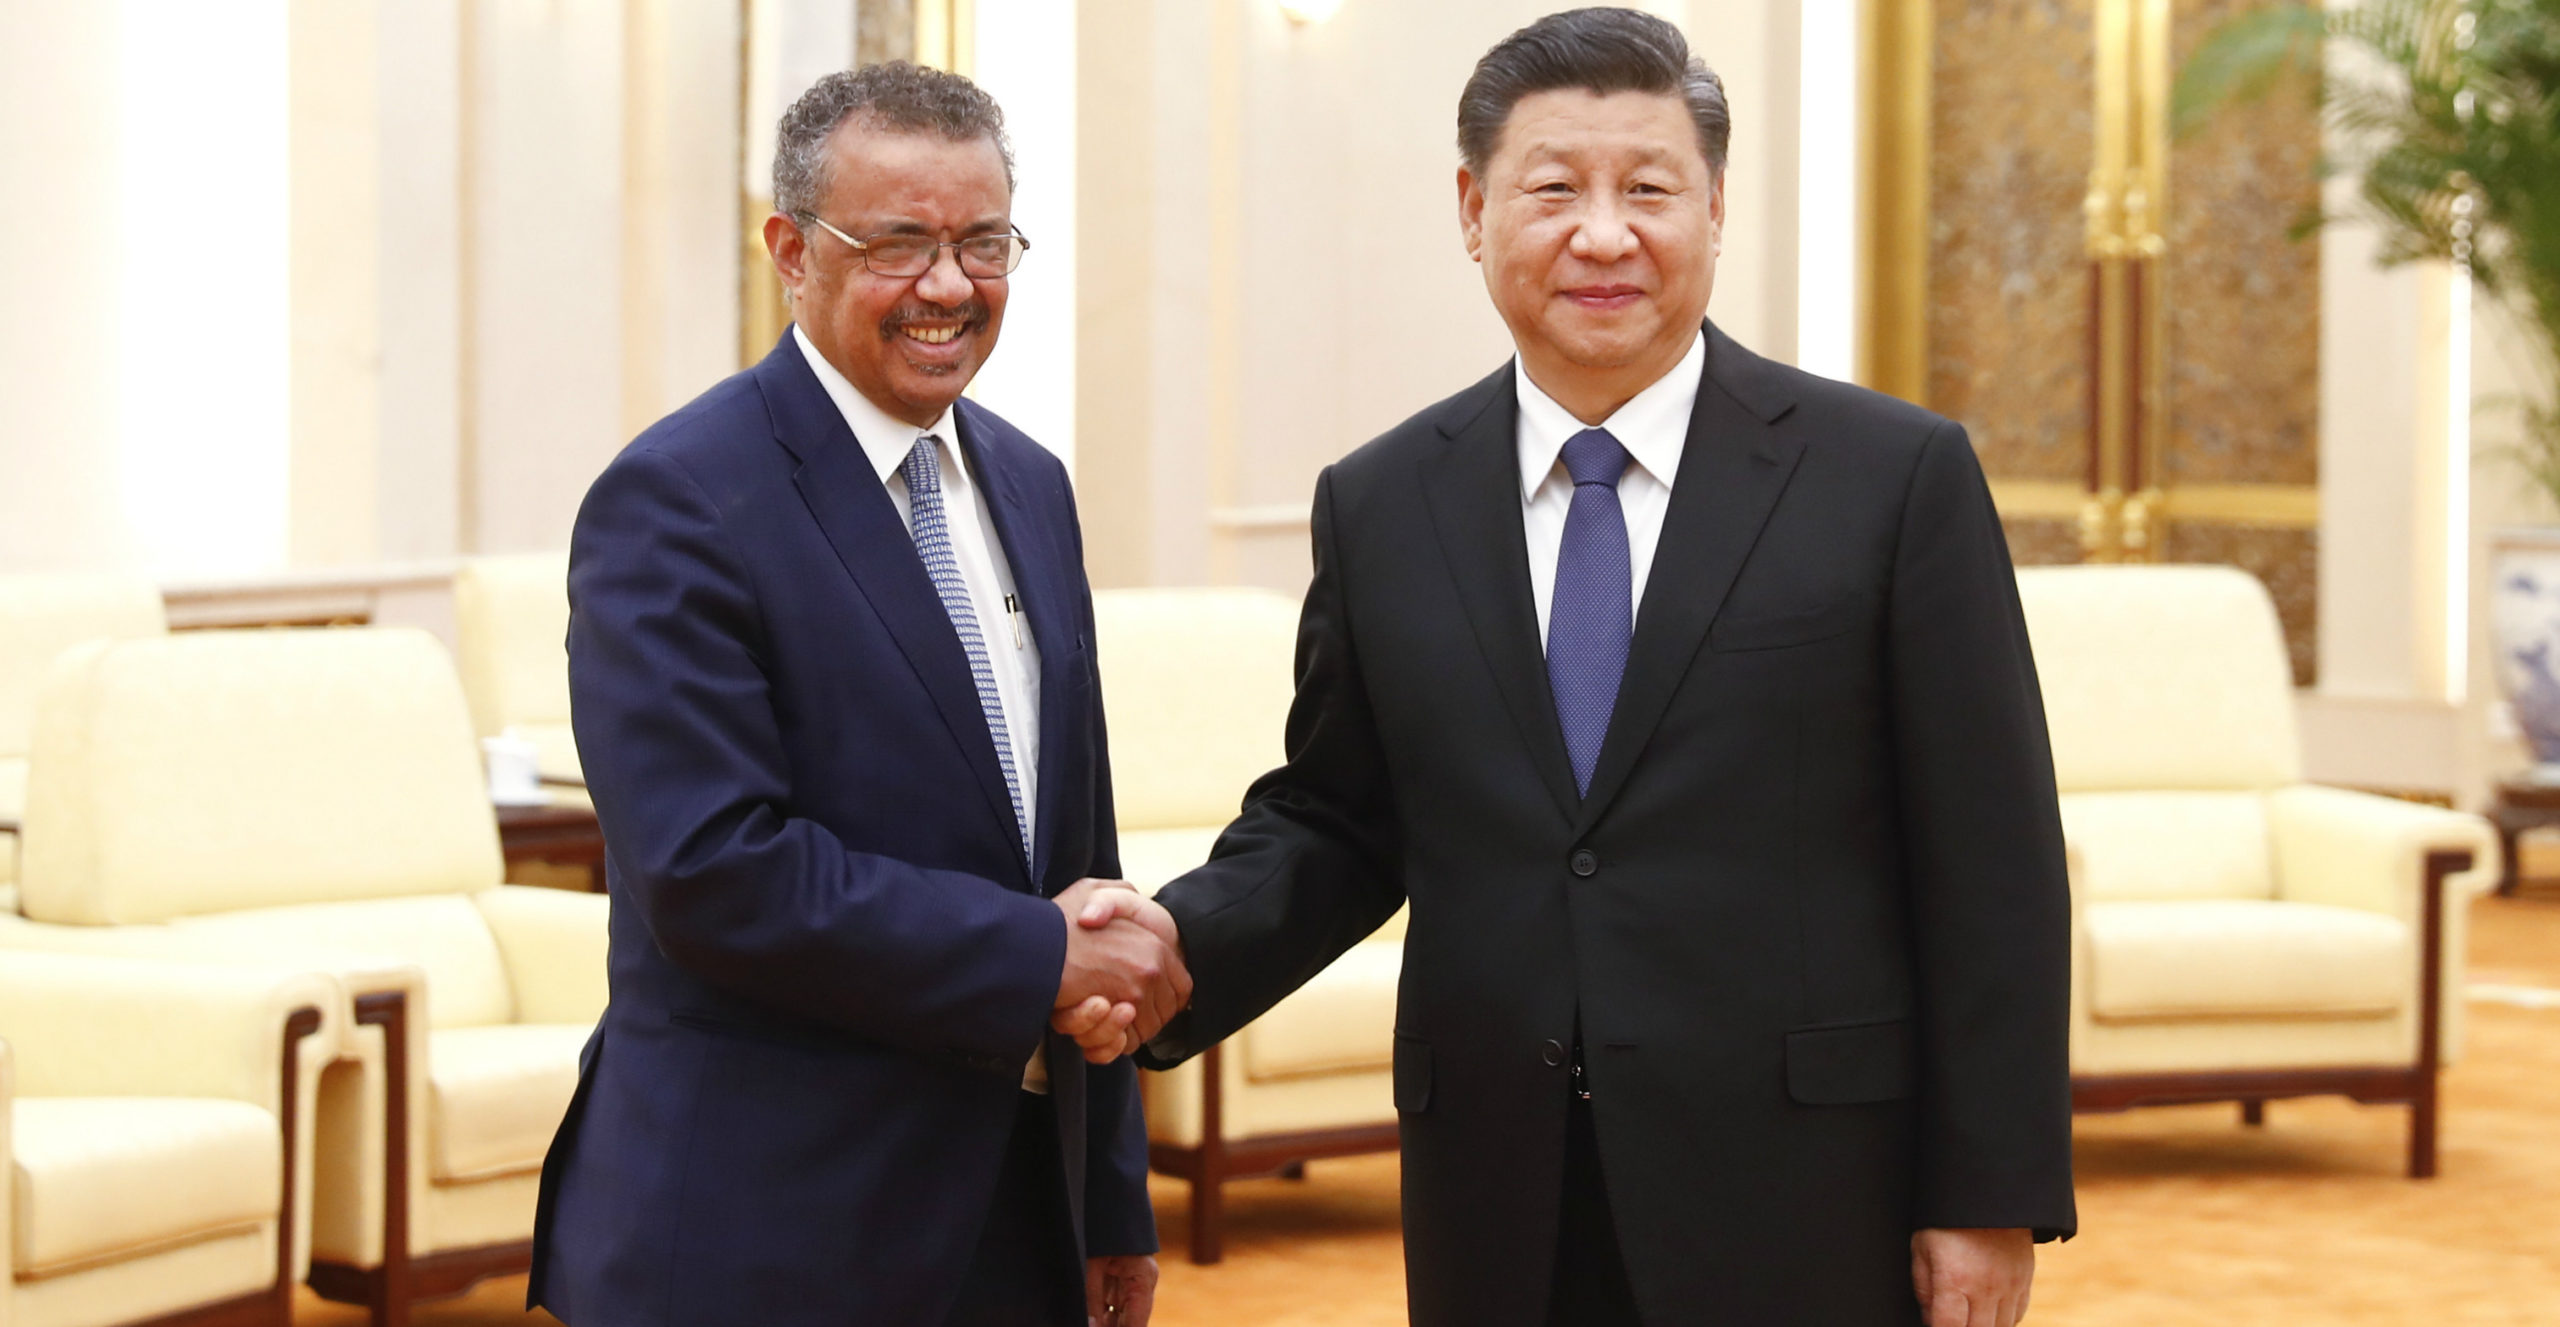 L-R: WHO Director-General, Tedros Adhanom Ghebreyesus and Chinese president, Xi Jinping.